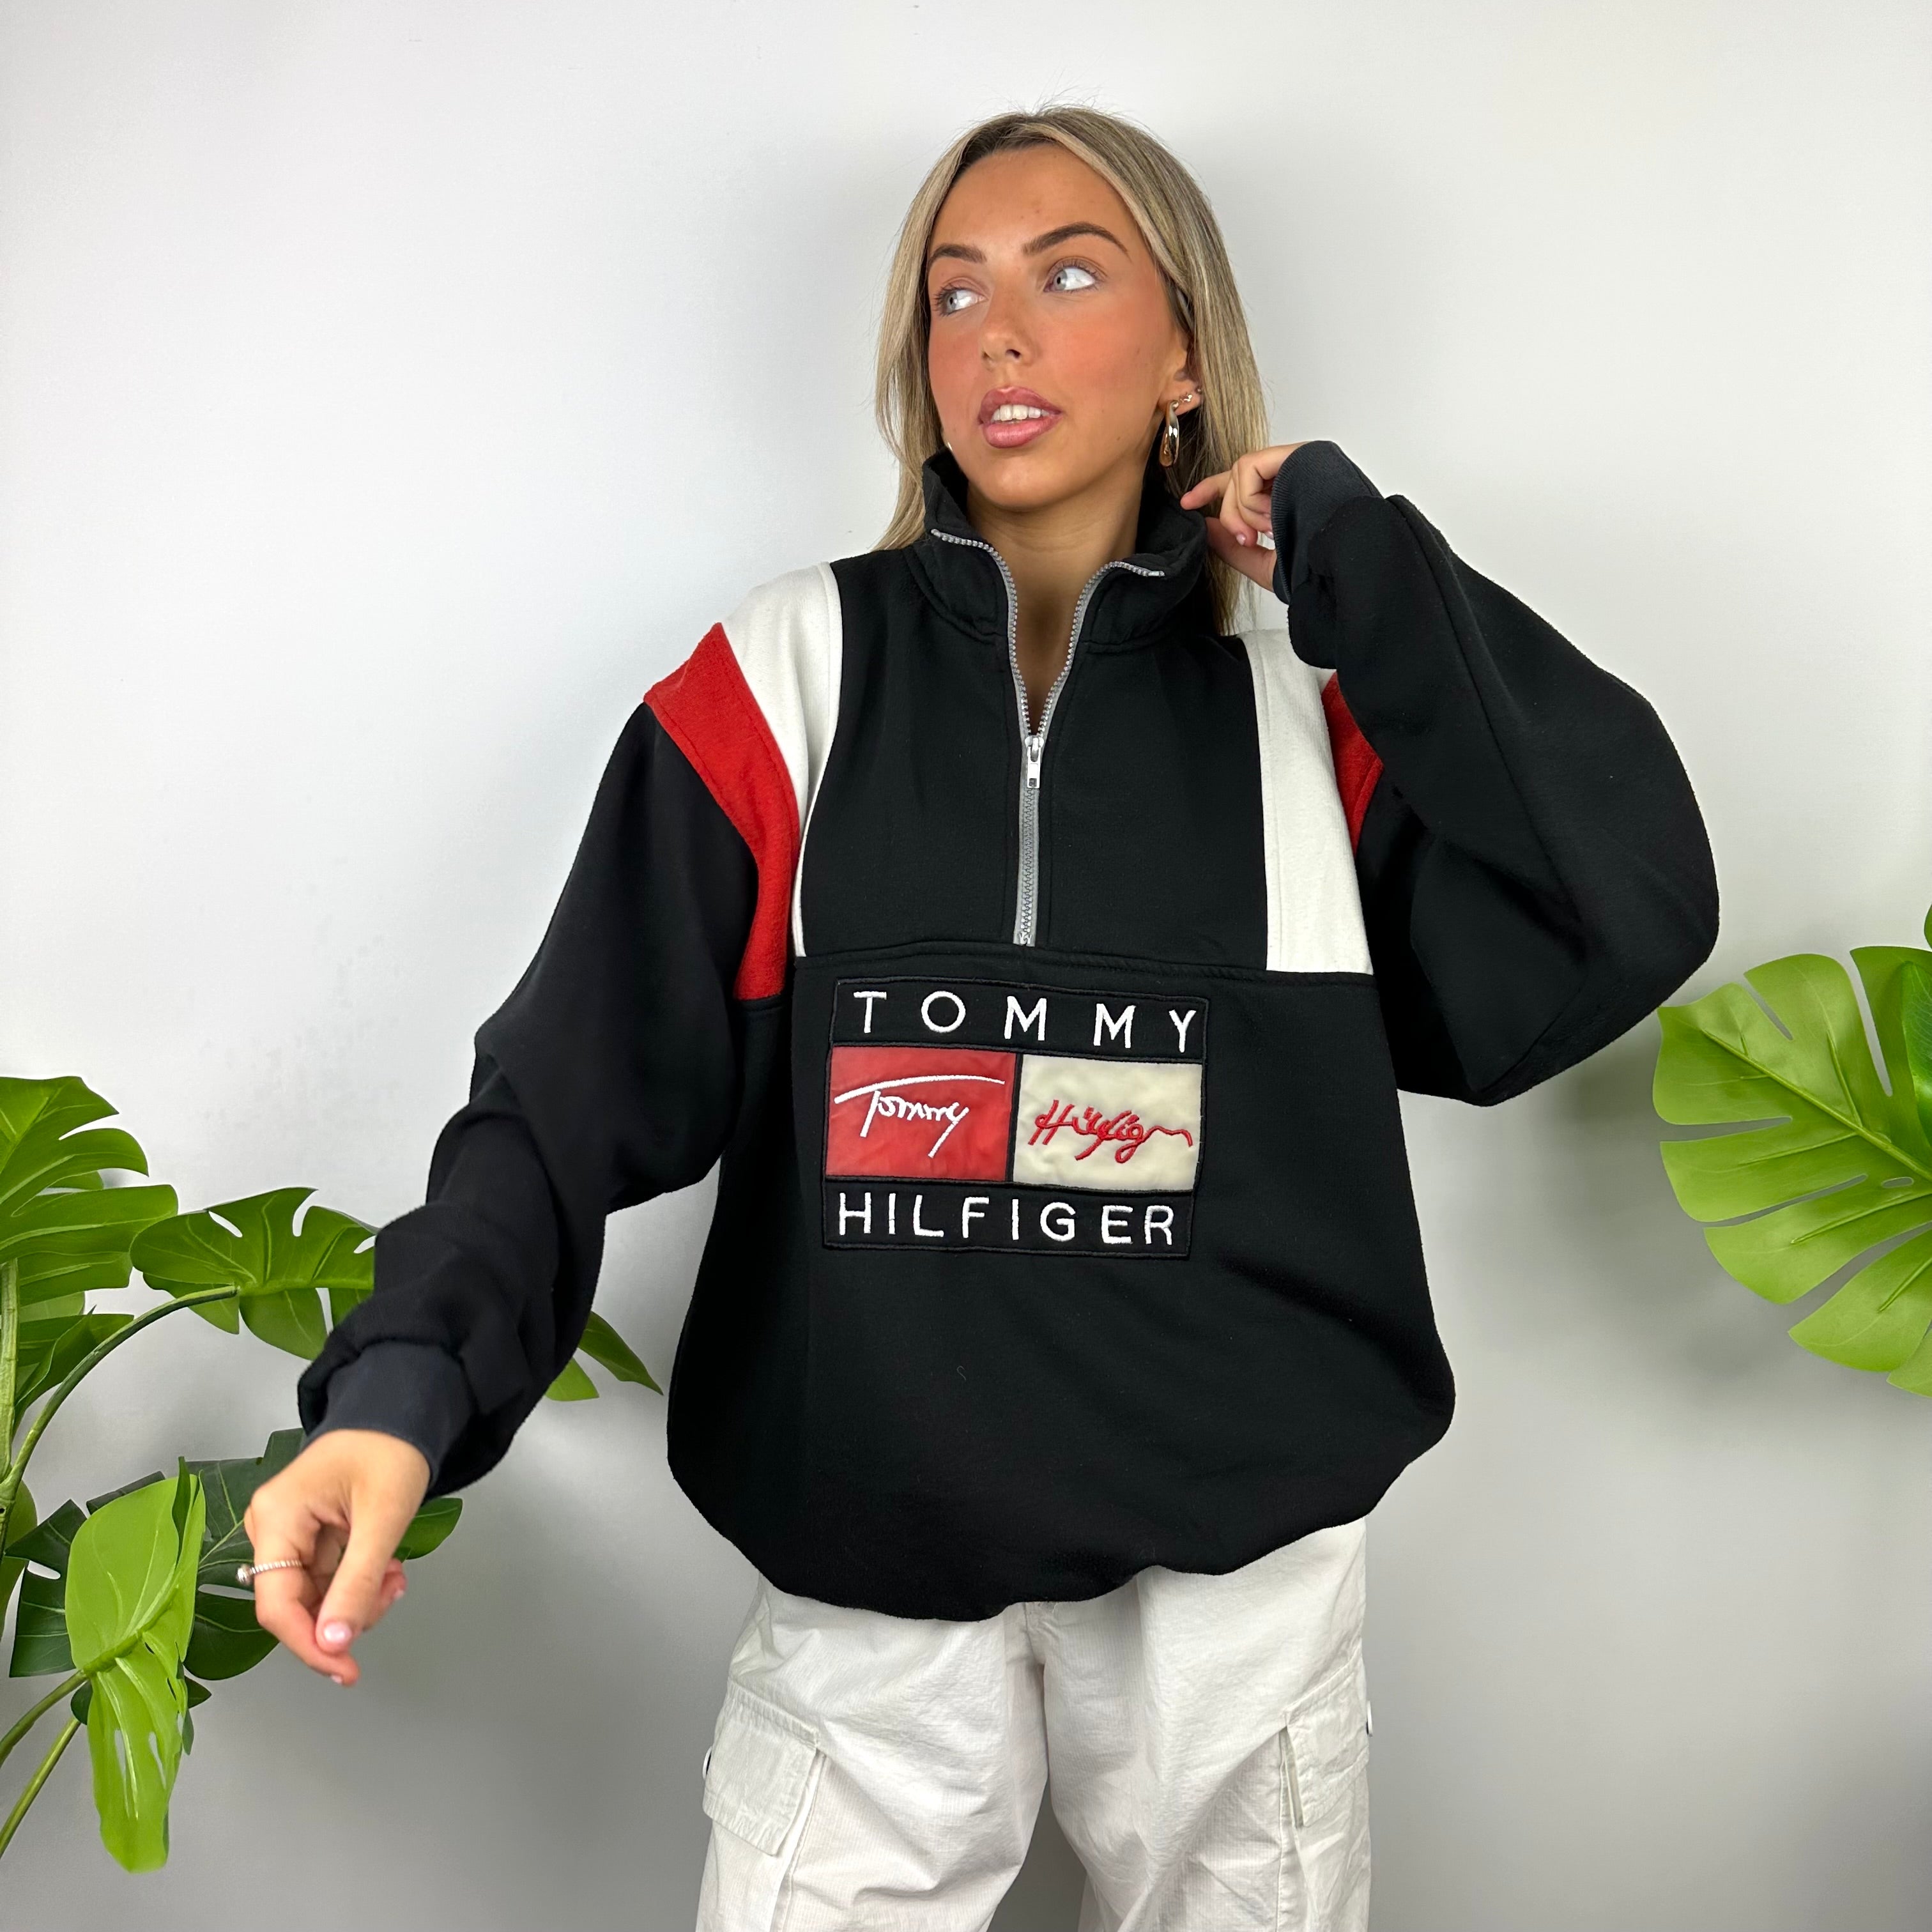 Tommy Hilfiger Black Embroidered Spell Out Quarter Zip Sweatshirt as worn by Annalivia Hynds (XL)